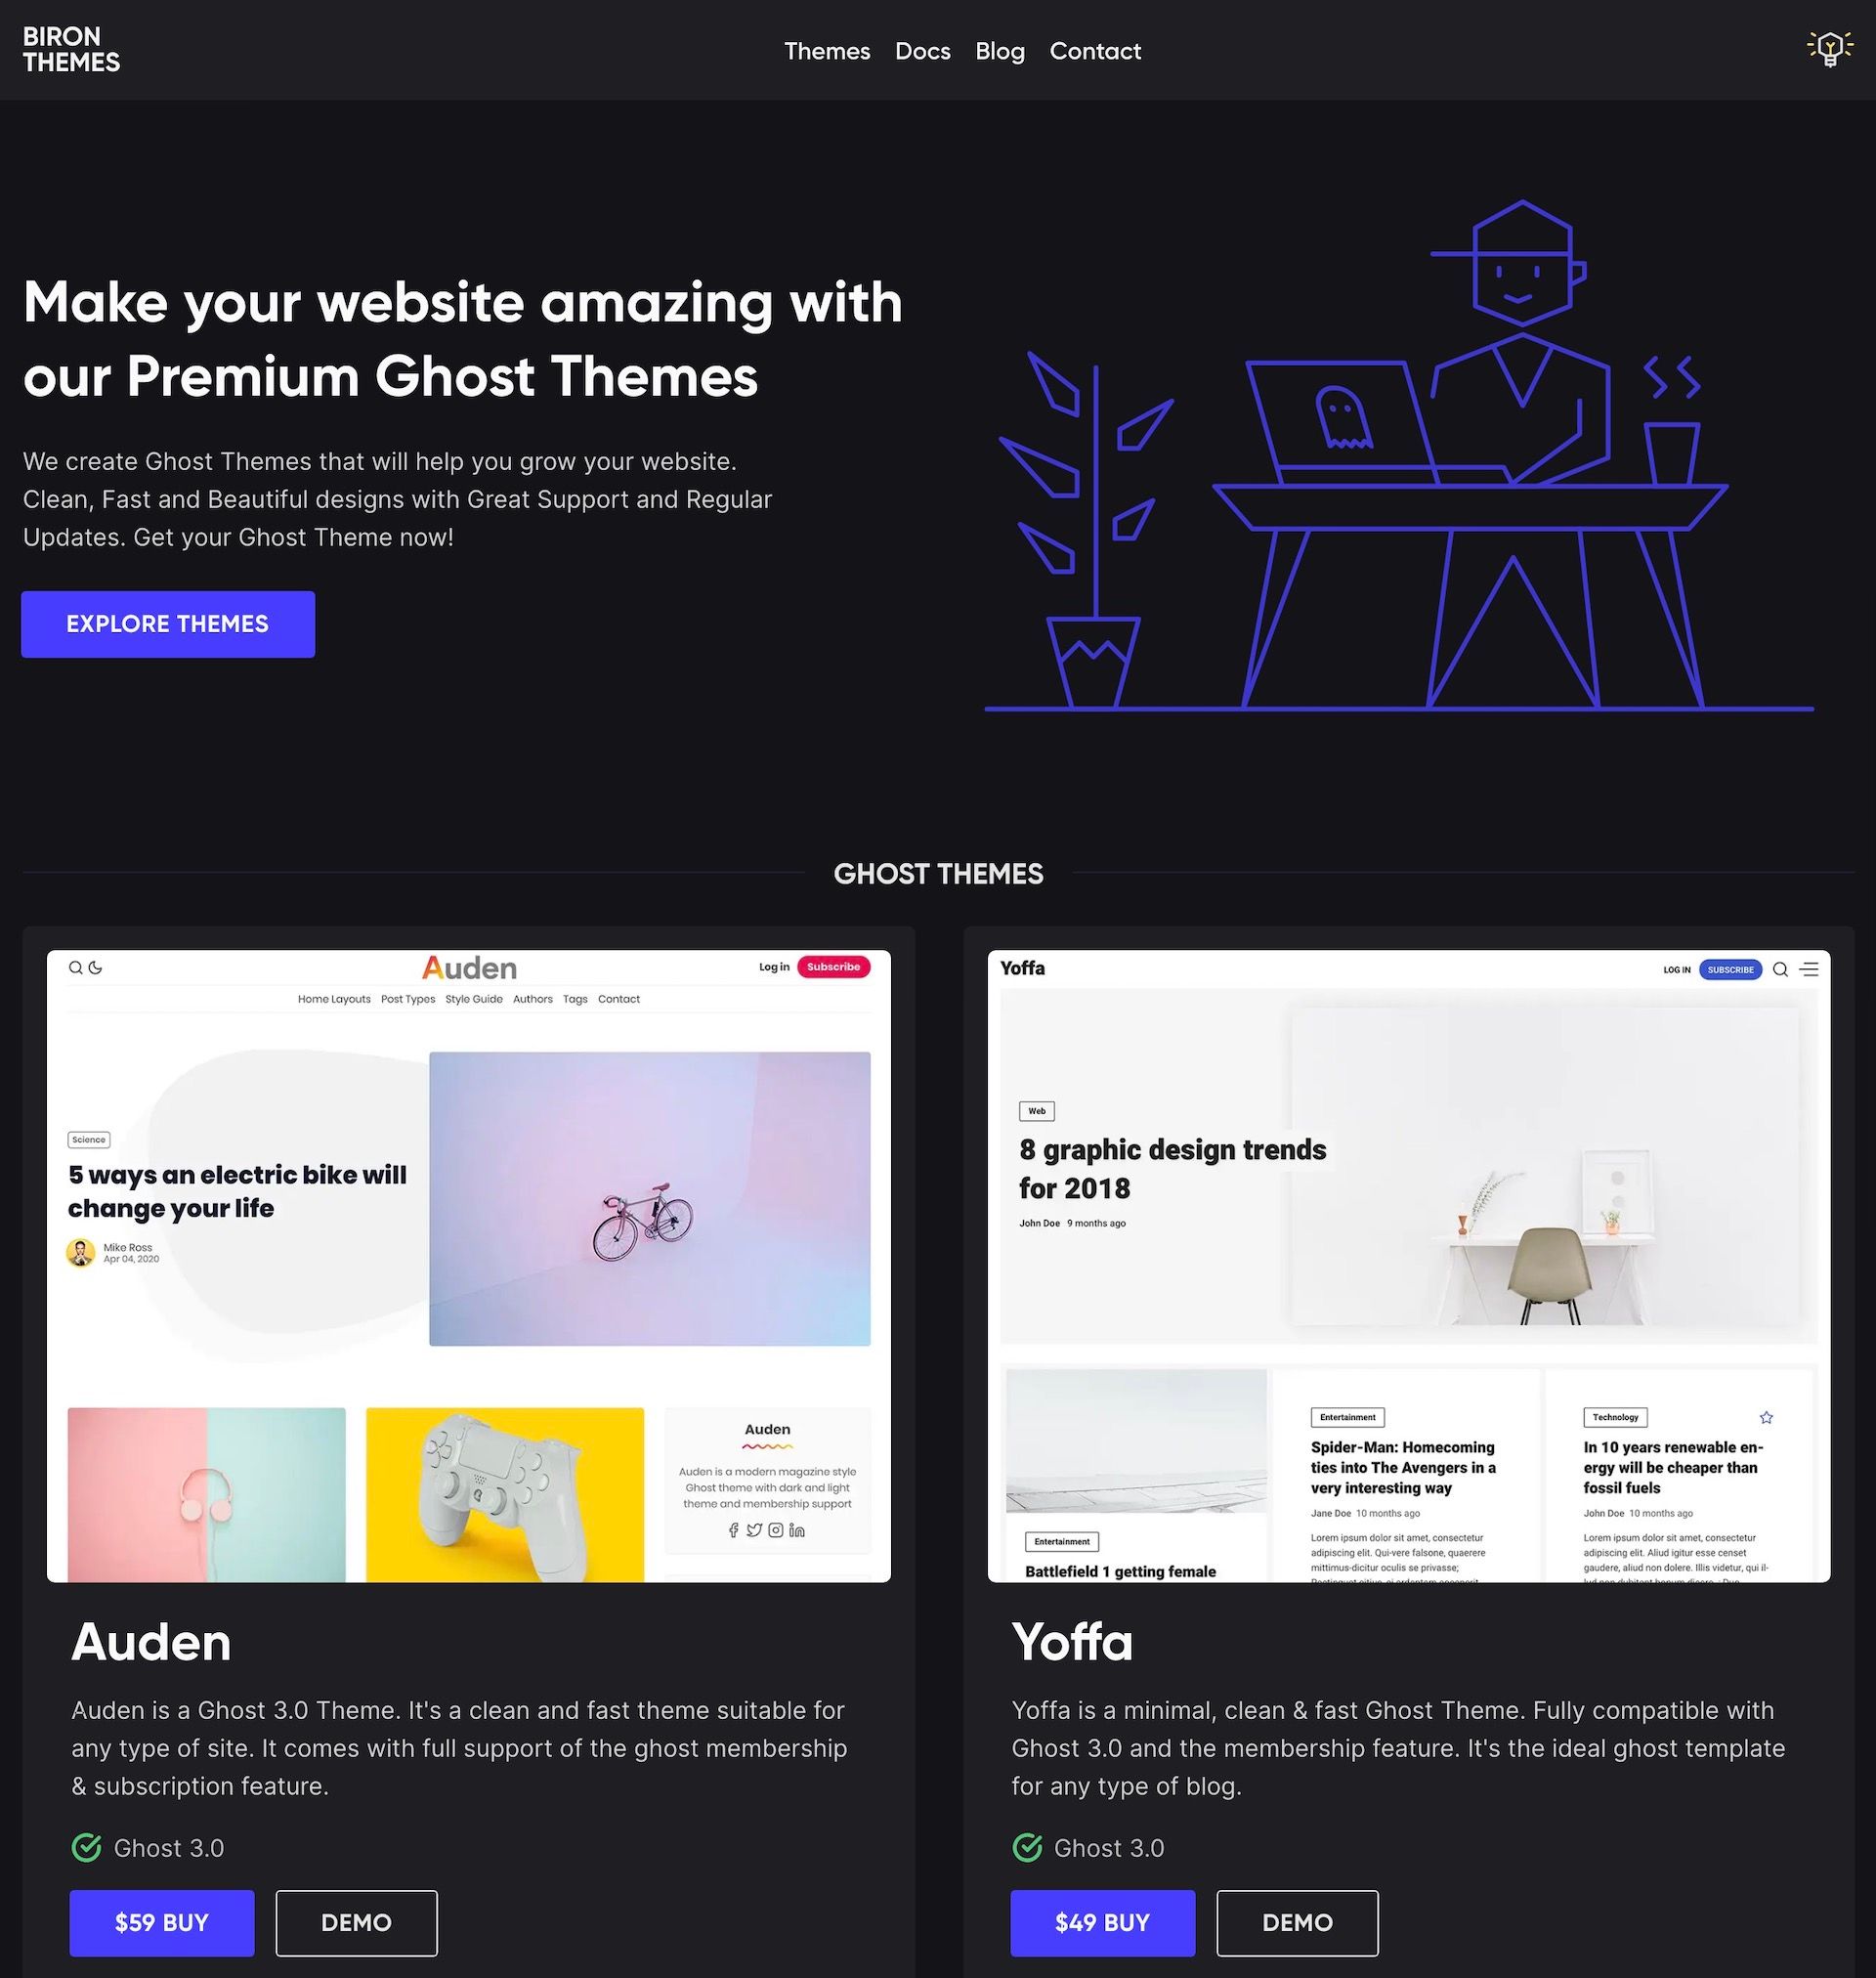 The best places to find Ghost Themes in 2020